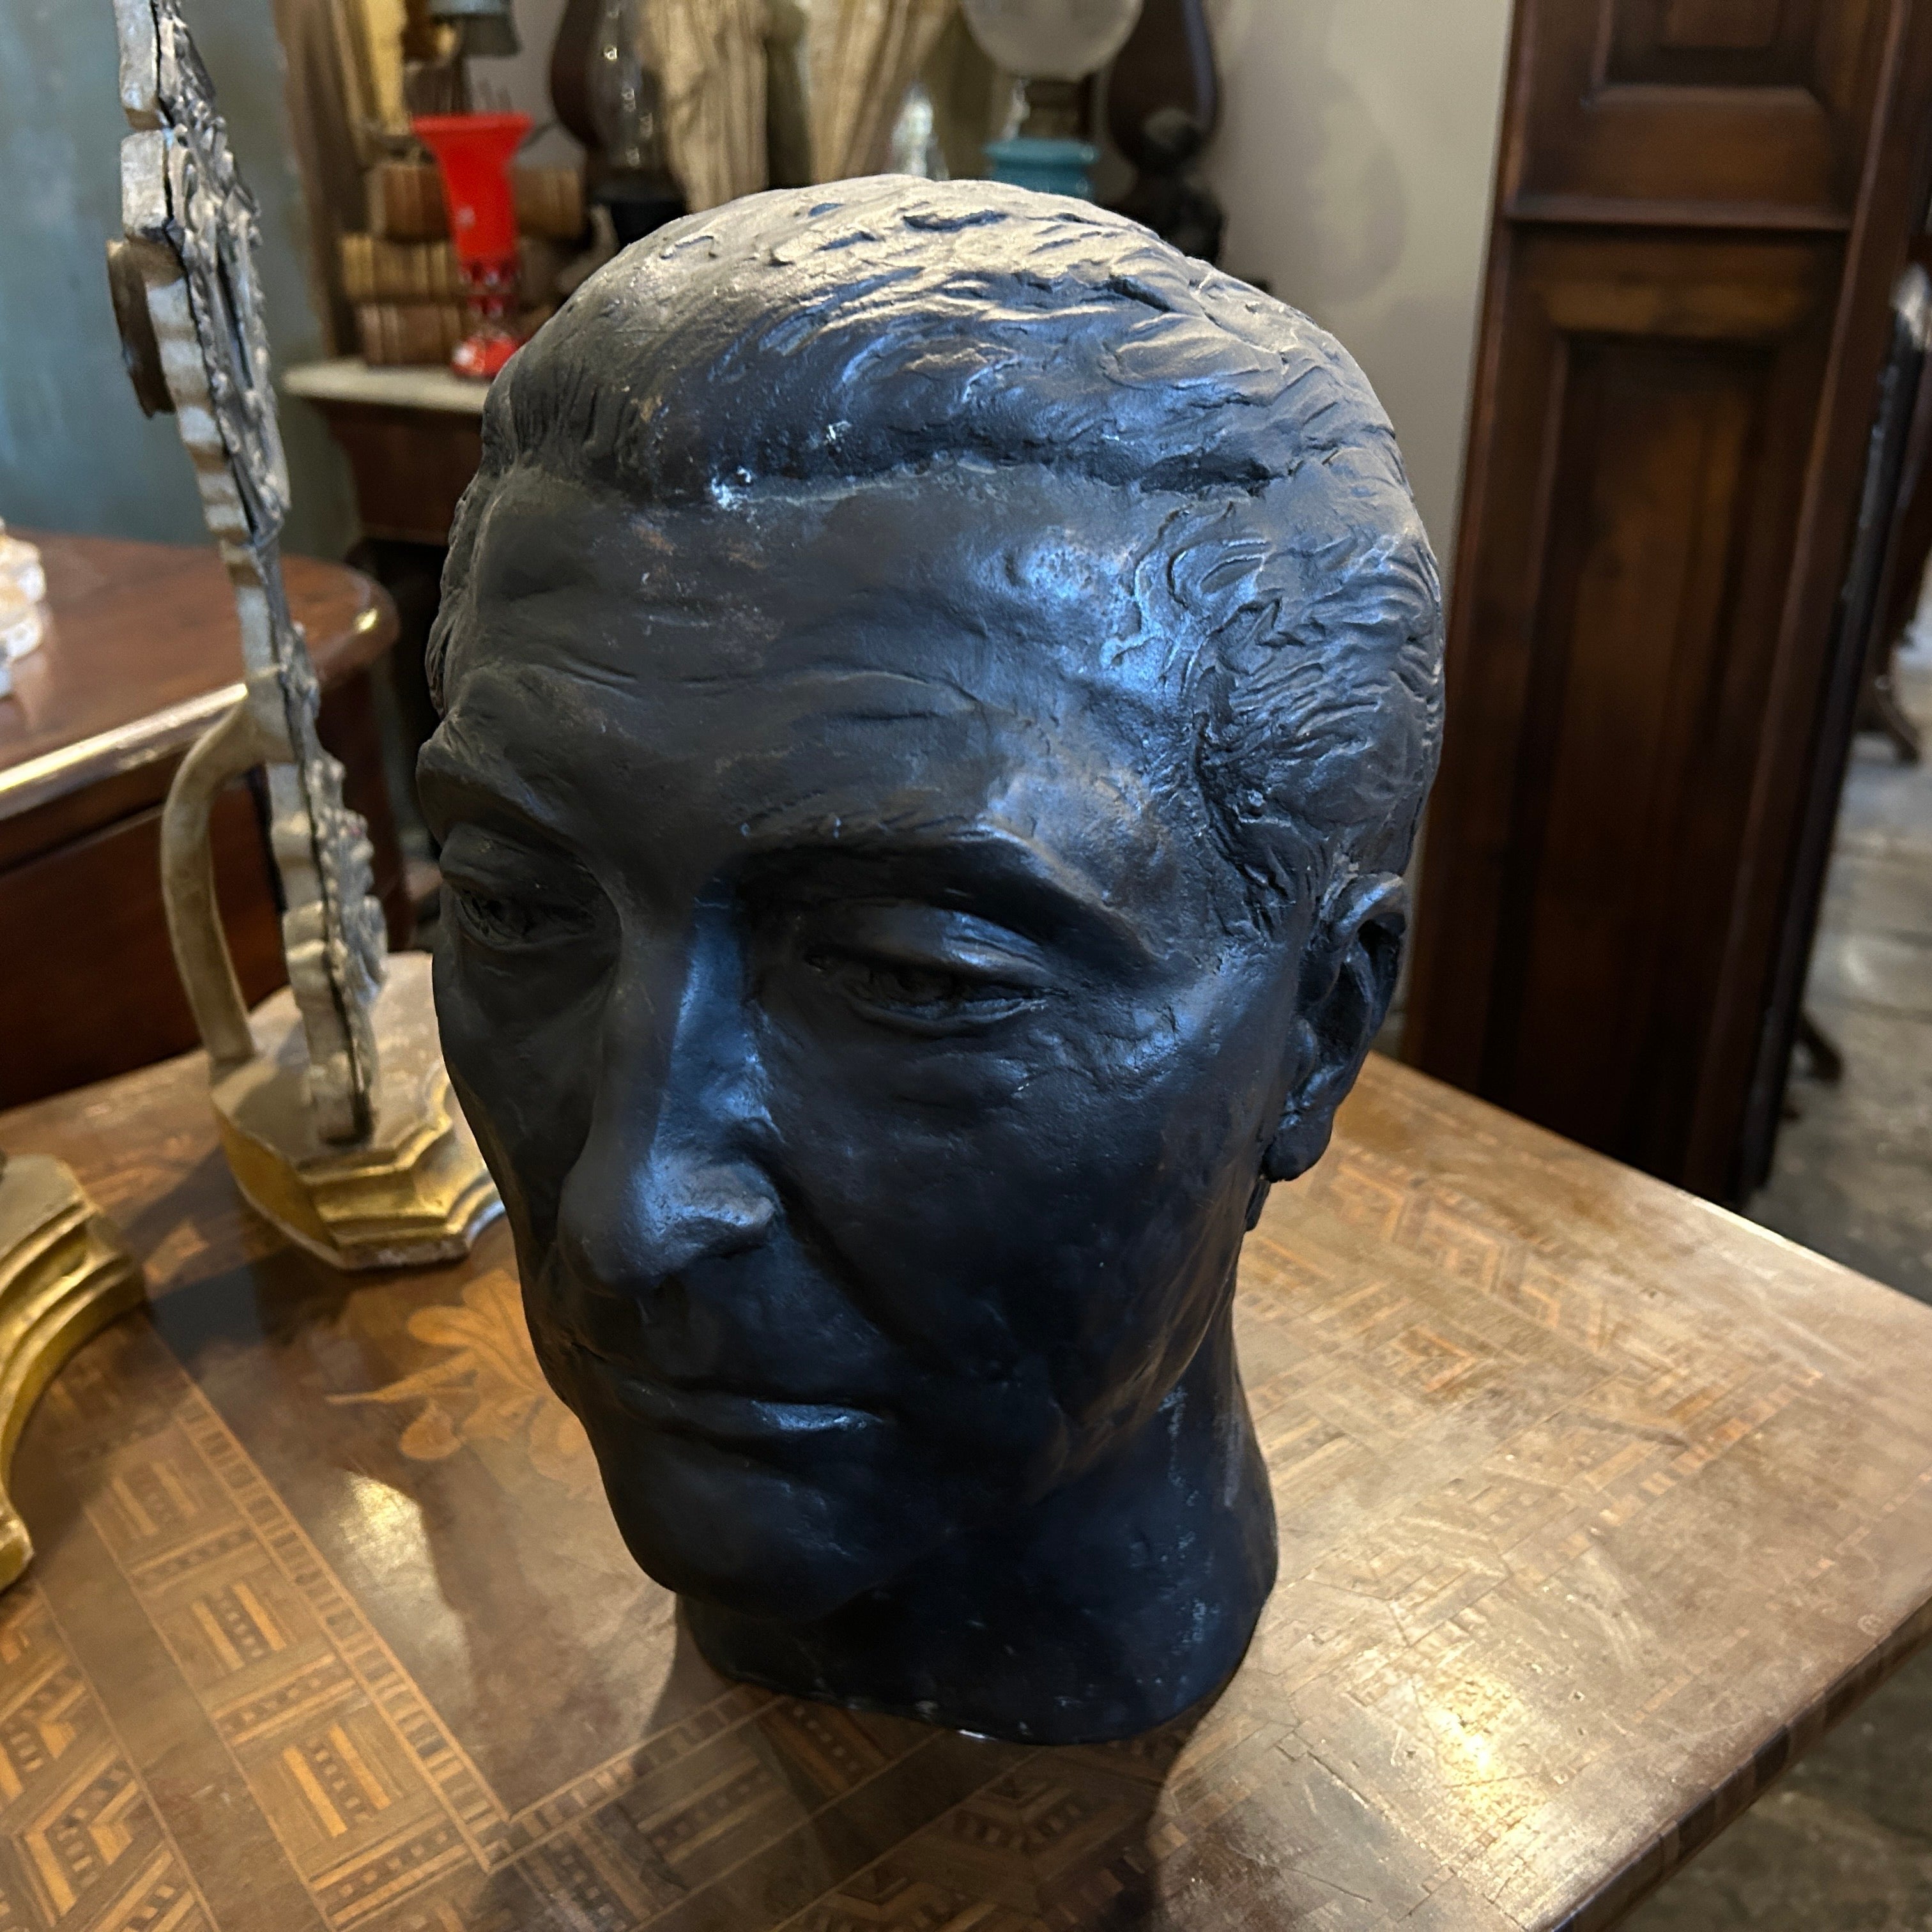 A 1920s Sicilian bronze head it's a sculpture created in the early 20th century on the island of Sicily. It has been cast from bronze, a durable and long-lasting Material, and shaped into the form of a head, with a lifelike appearance.
Sicilian